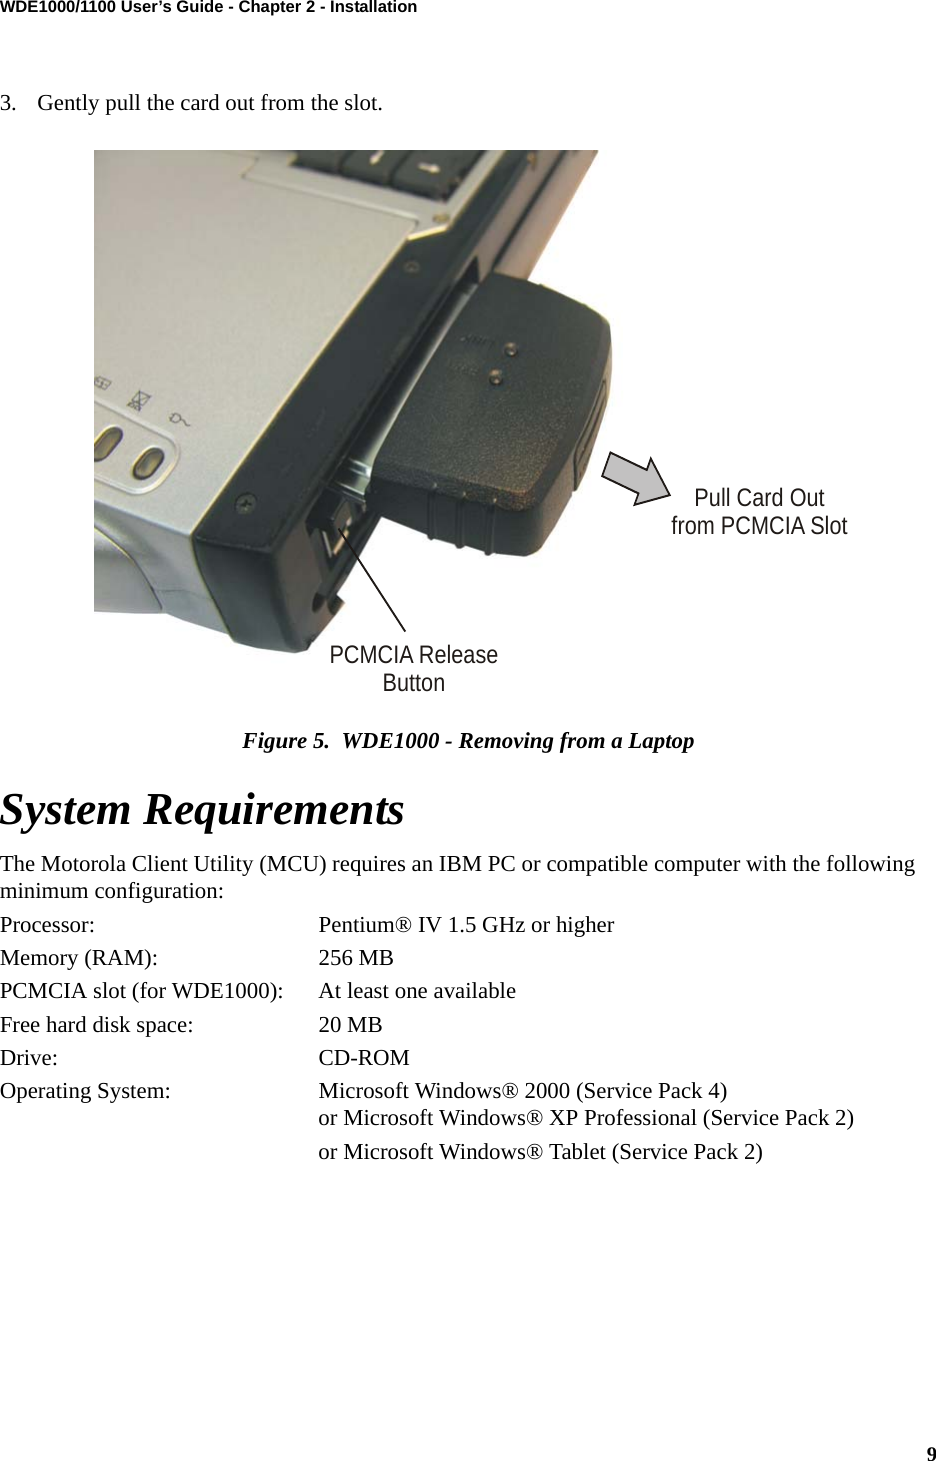 9WDE1000/1100 User’s Guide - Chapter 2 - Installation3. Gently pull the card out from the slot.Figure 5.  WDE1000 - Removing from a LaptopSystem RequirementsThe Motorola Client Utility (MCU) requires an IBM PC or compatible computer with the following minimum configuration:Processor: Pentium® IV 1.5 GHz or higherMemory (RAM): 256 MBPCMCIA slot (for WDE1000): At least one availableFree hard disk space: 20 MBDrive: CD-ROMOperating System: Microsoft Windows® 2000 (Service Pack 4) or Microsoft Windows® XP Professional (Service Pack 2)or Microsoft Windows® Tablet (Service Pack 2)PCMCIA ReleaseButtonPull Card Outfrom PCMCIA Slot